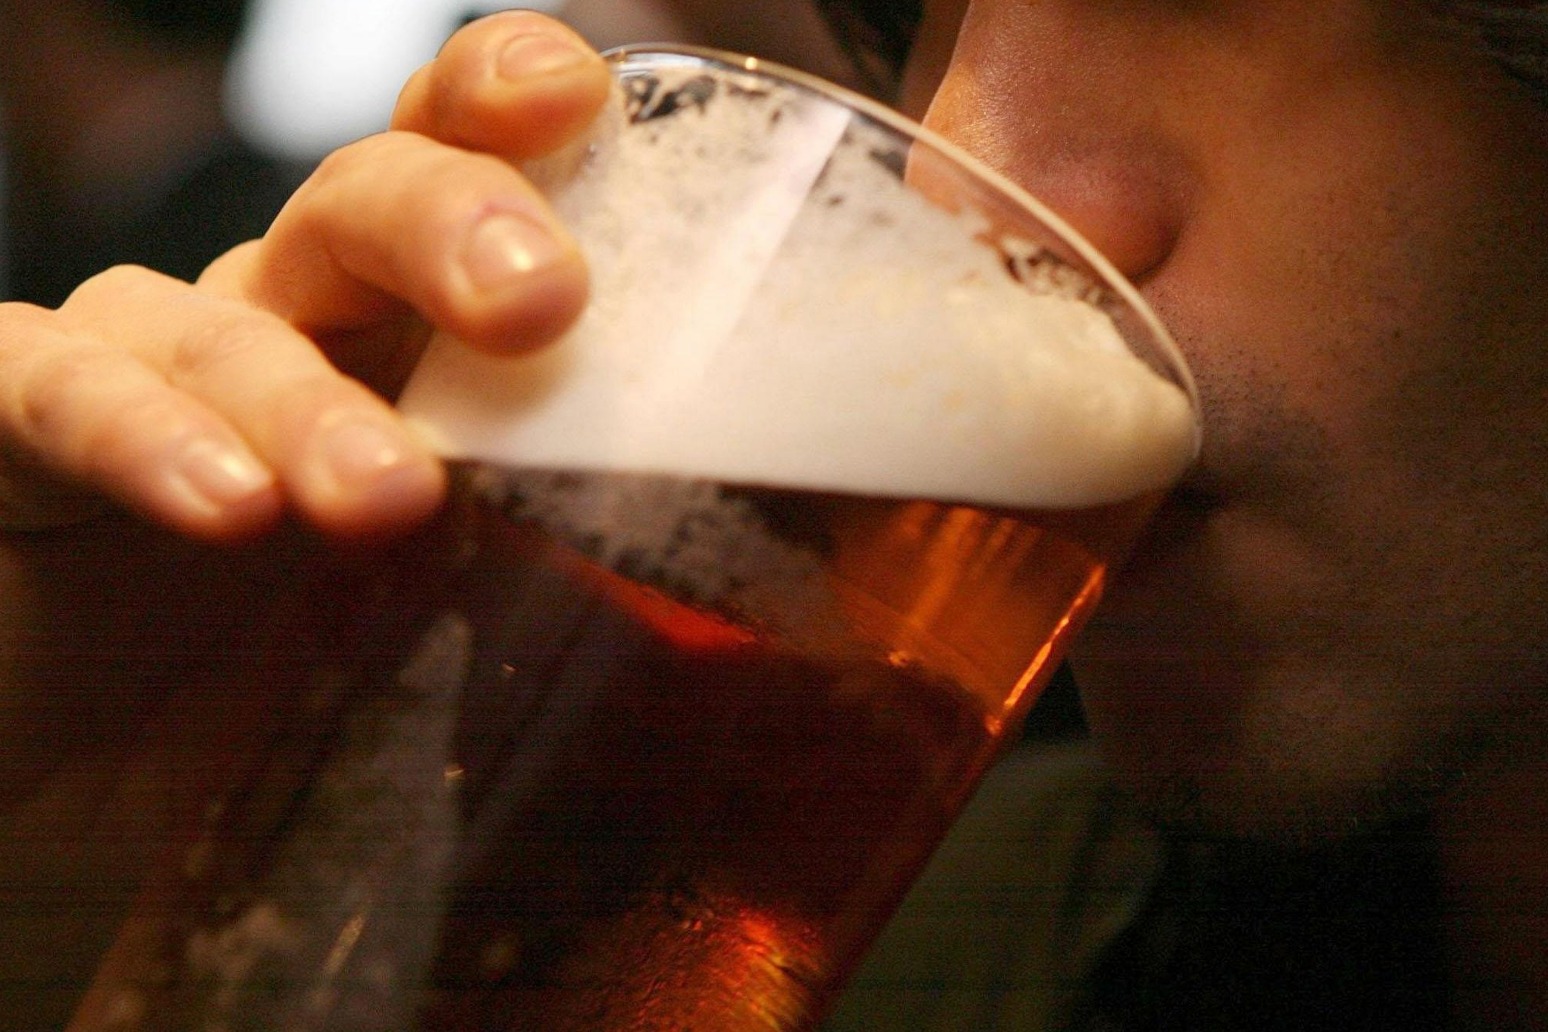 Minimum alcohol pricing policy may not be curbing drinking in those most at risk 